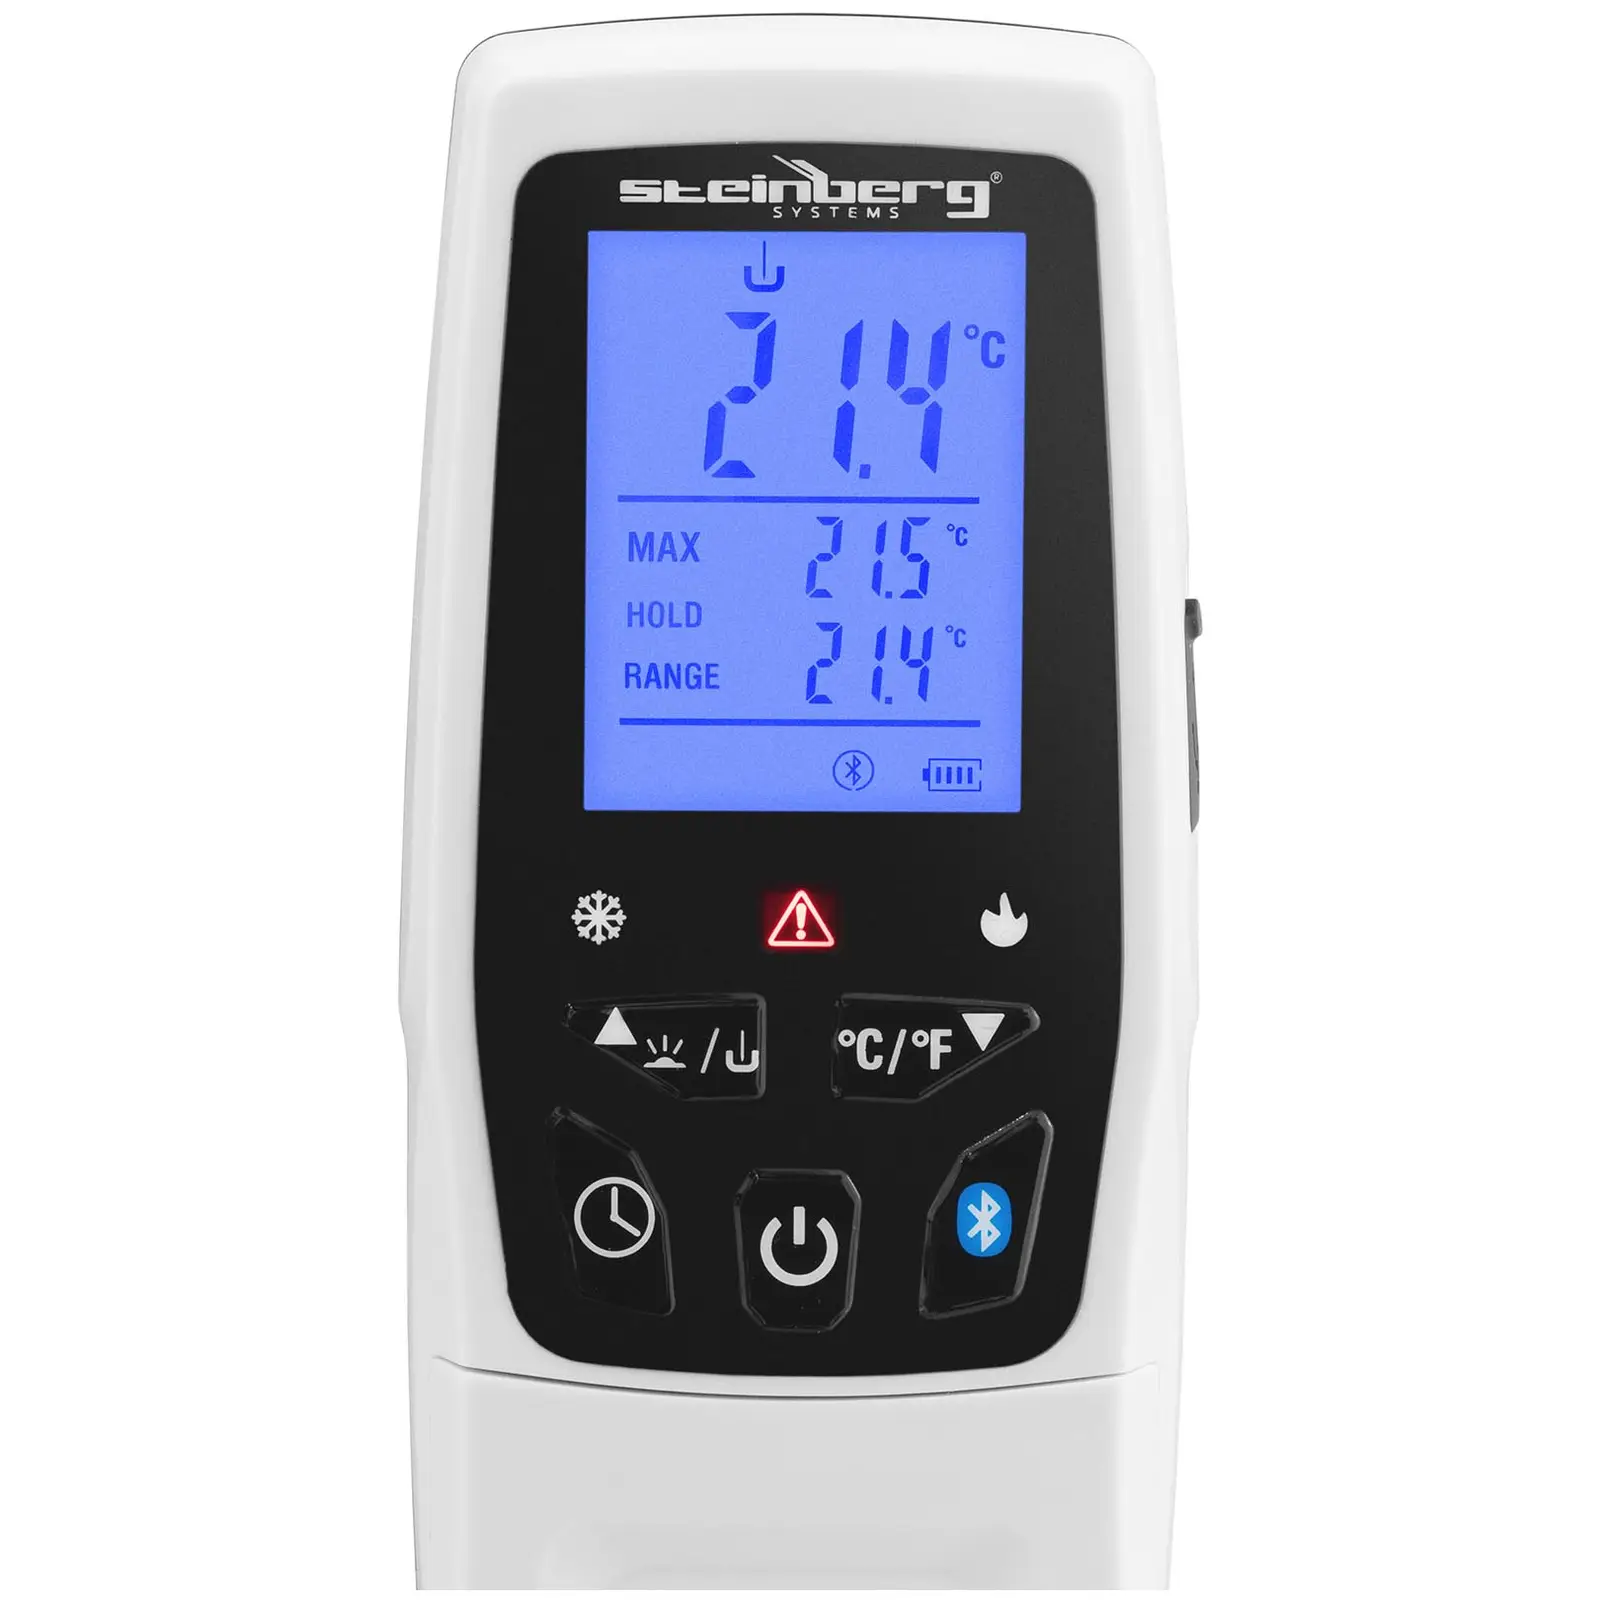 Food Thermometer - Infrared and probe - HACCP